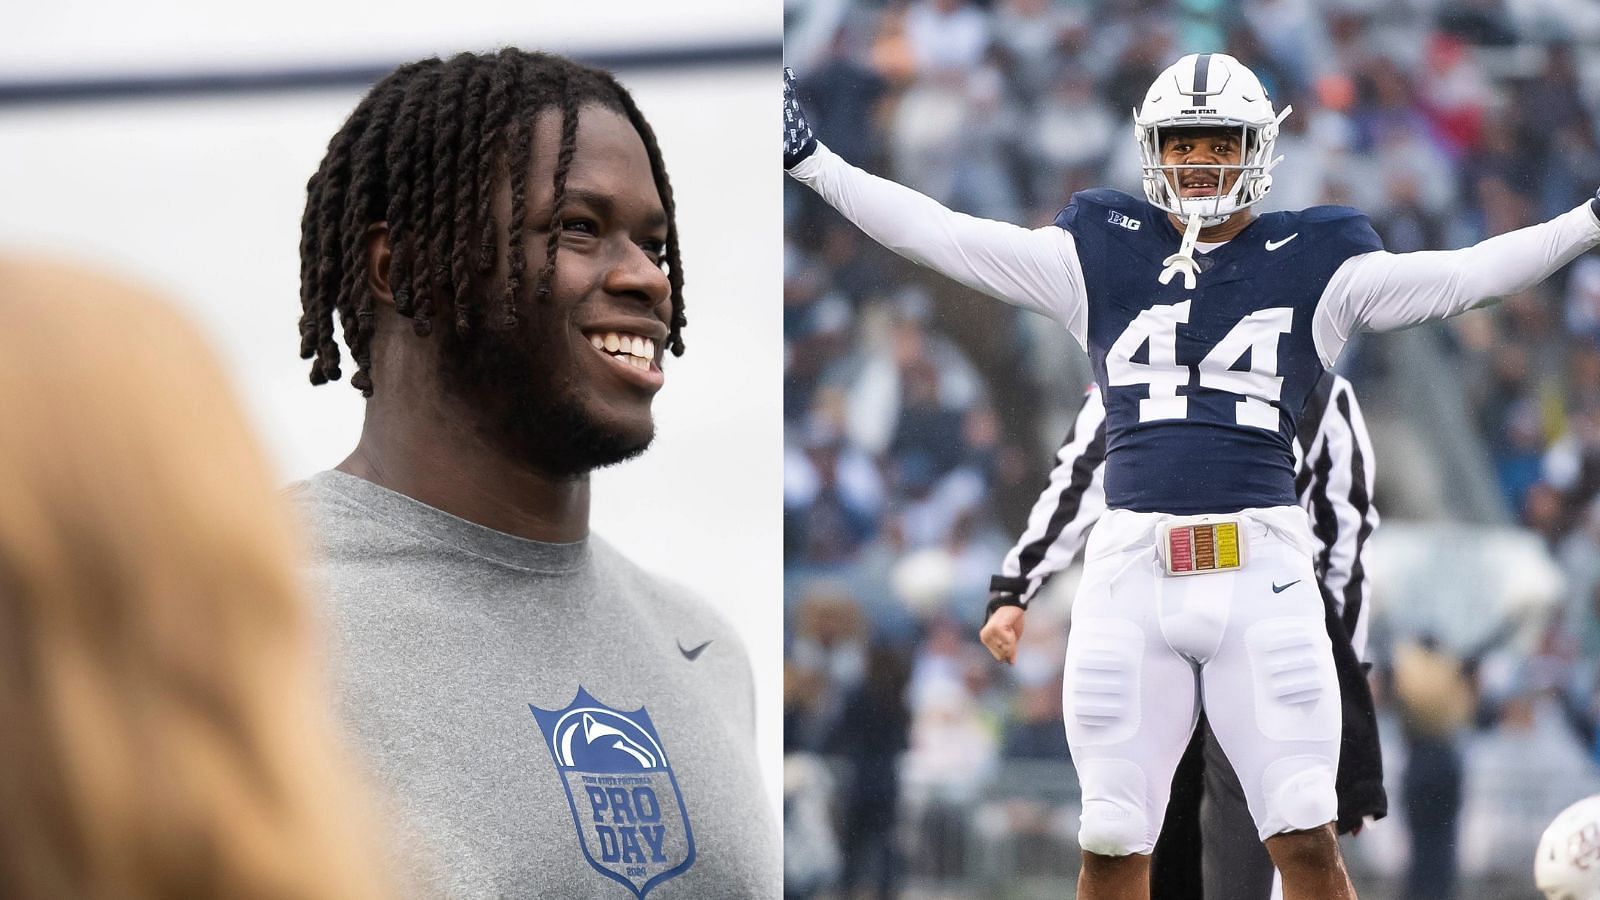 Penn State prospects Olu Fashanu and Chop Robinson are likely first round NFL Draft picks.